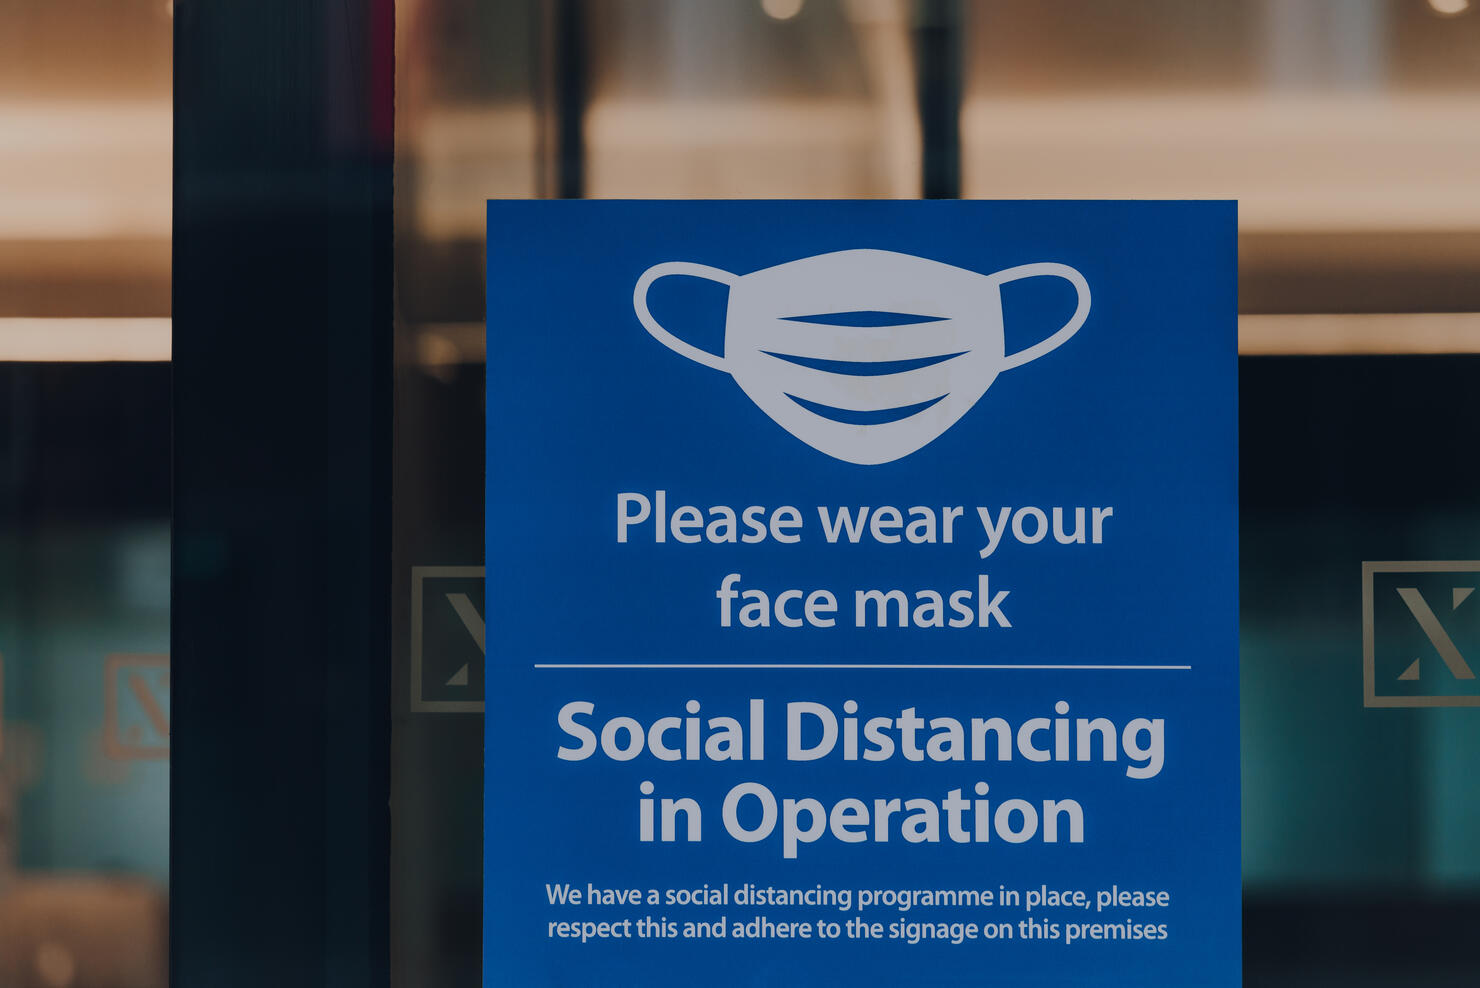 Please wear your face mask sign at the entrance of an office building in London, UK.